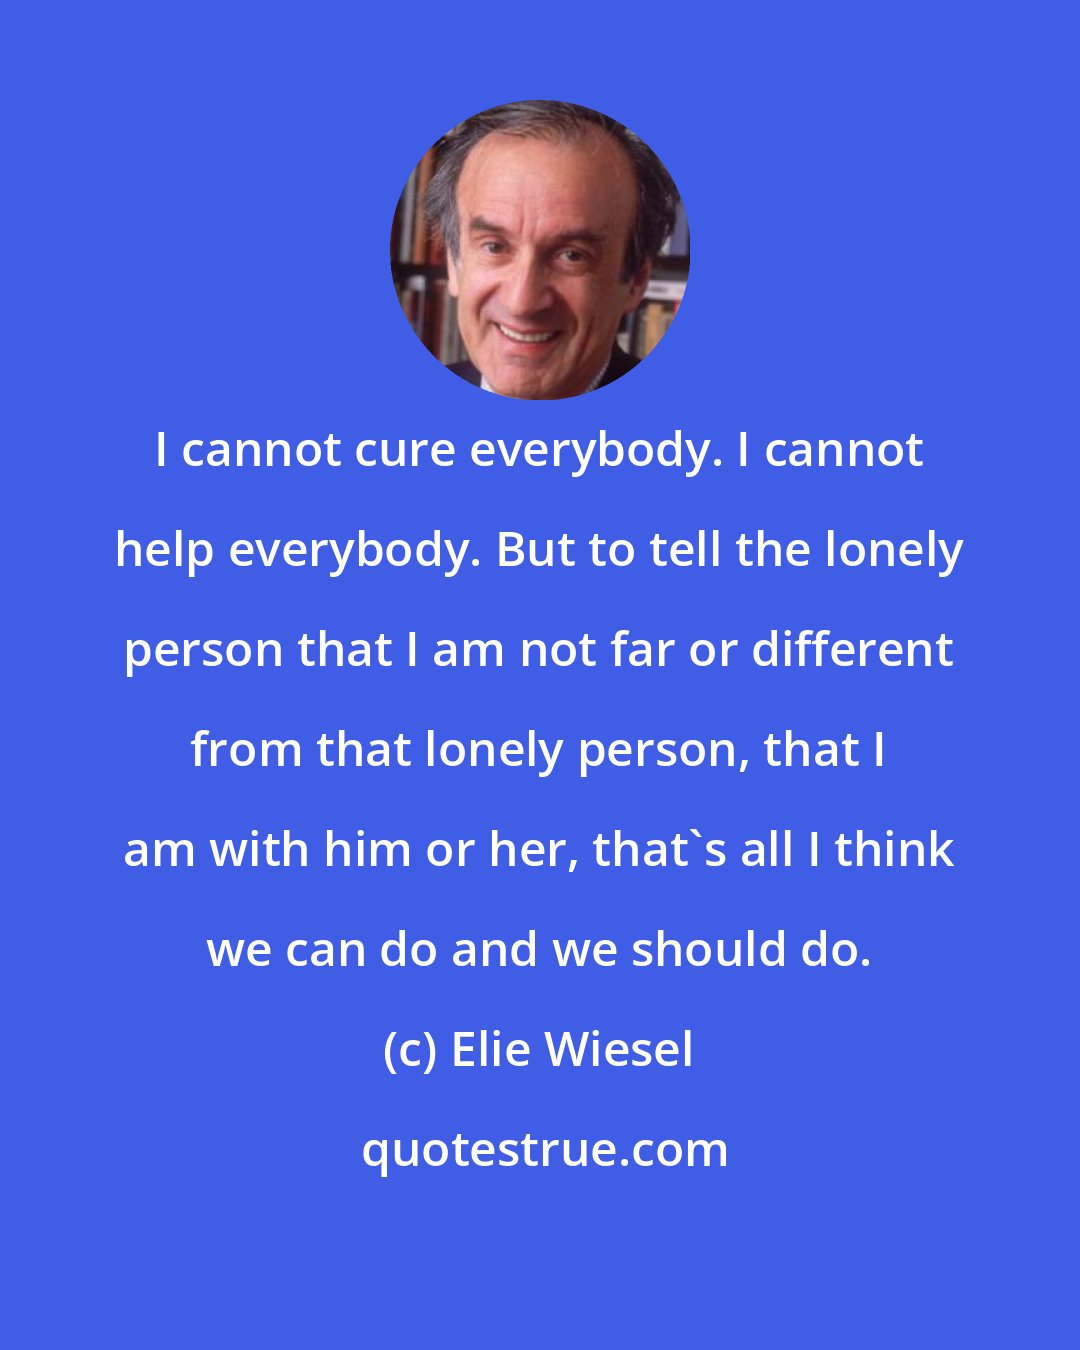 Elie Wiesel: I cannot cure everybody. I cannot help everybody. But to tell the lonely person that I am not far or different from that lonely person, that I am with him or her, that's all I think we can do and we should do.